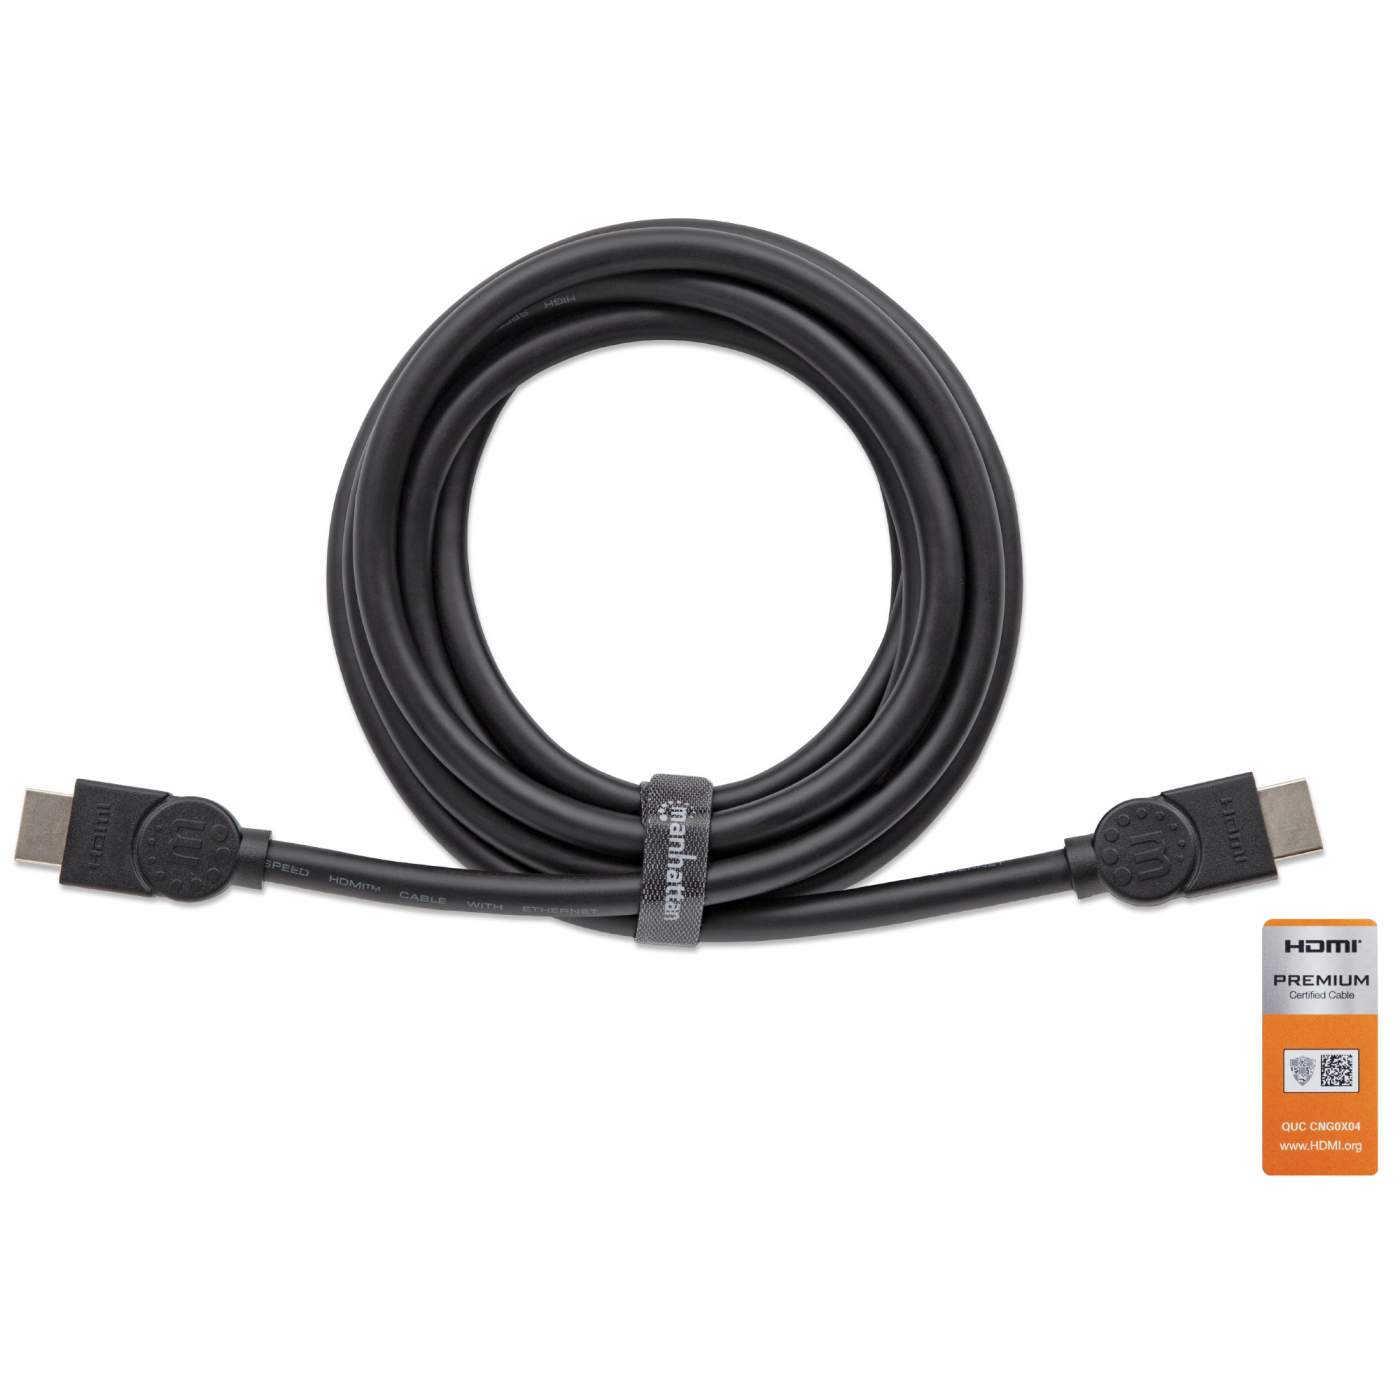 Cable Hdmi High Speed 3m, Cable Hdmi 4k 60hz 3m